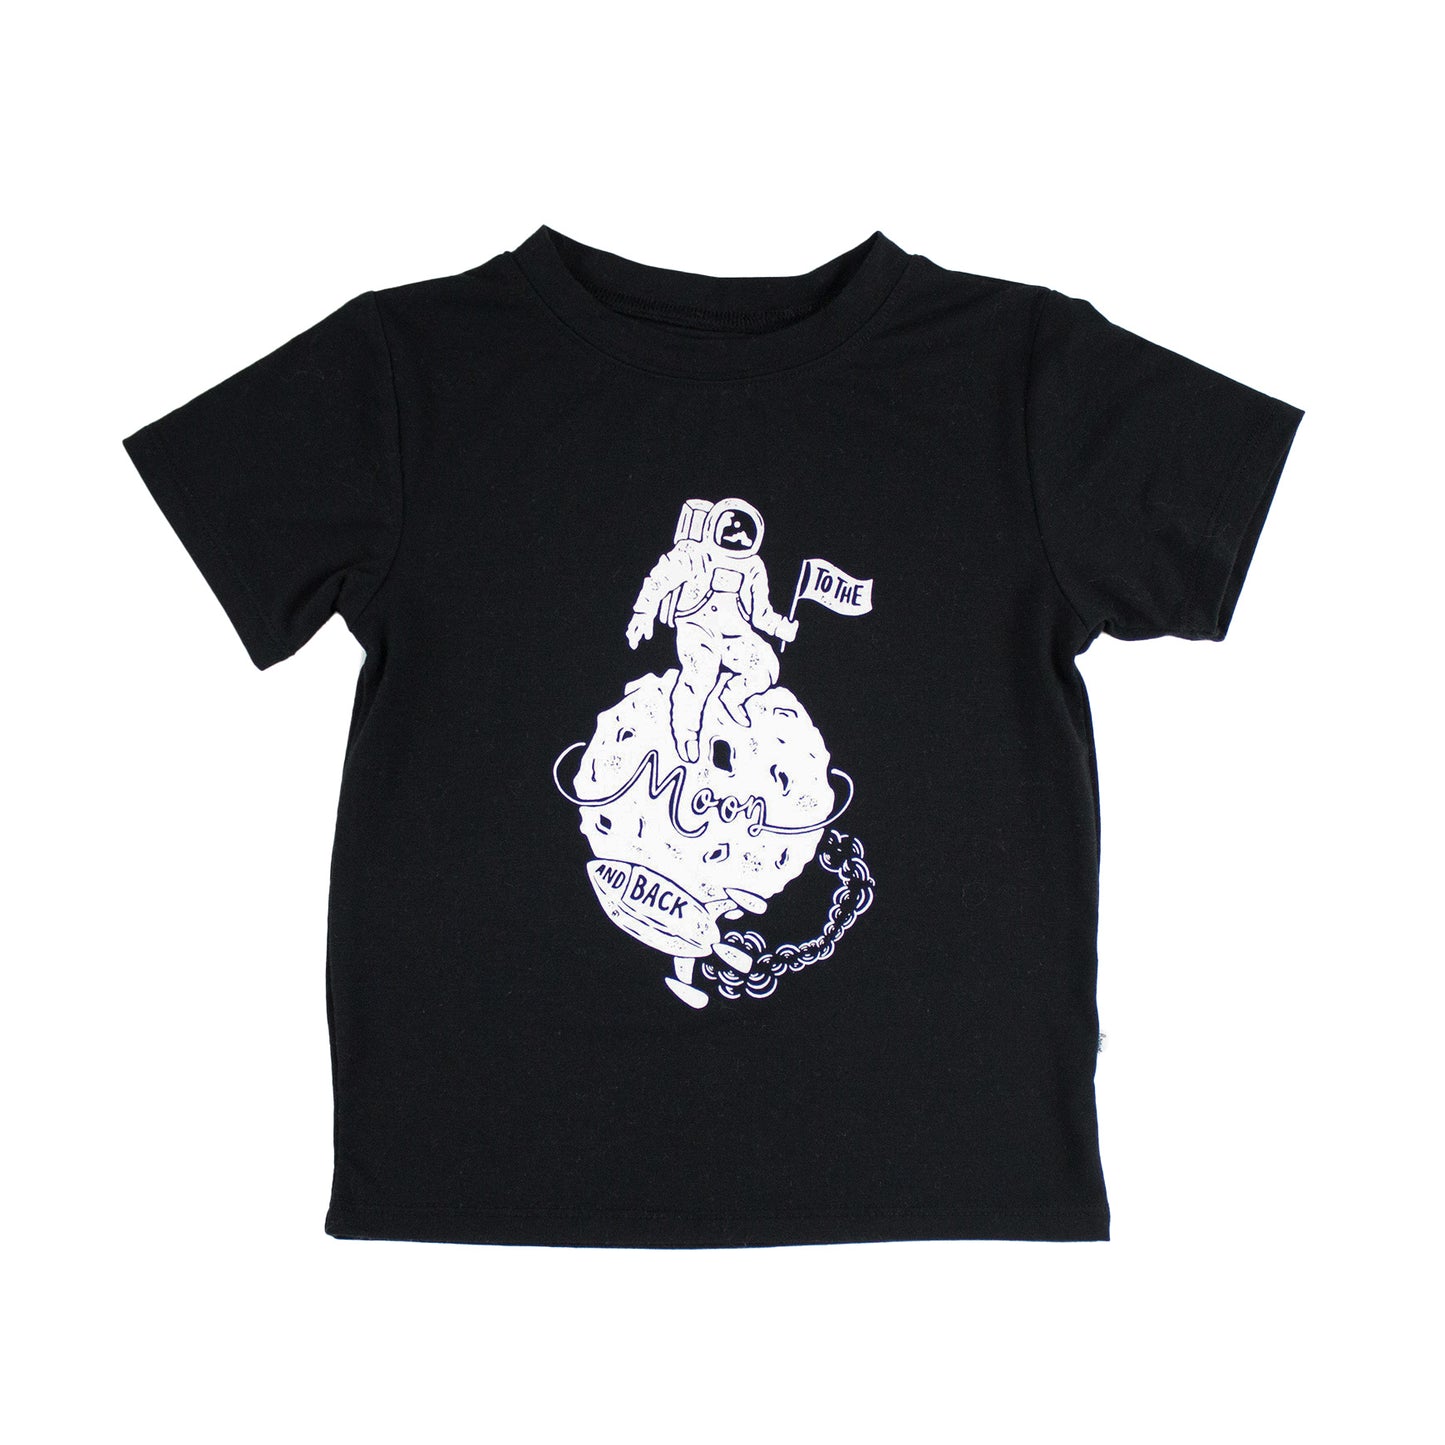 To The Moon & Back Shirt